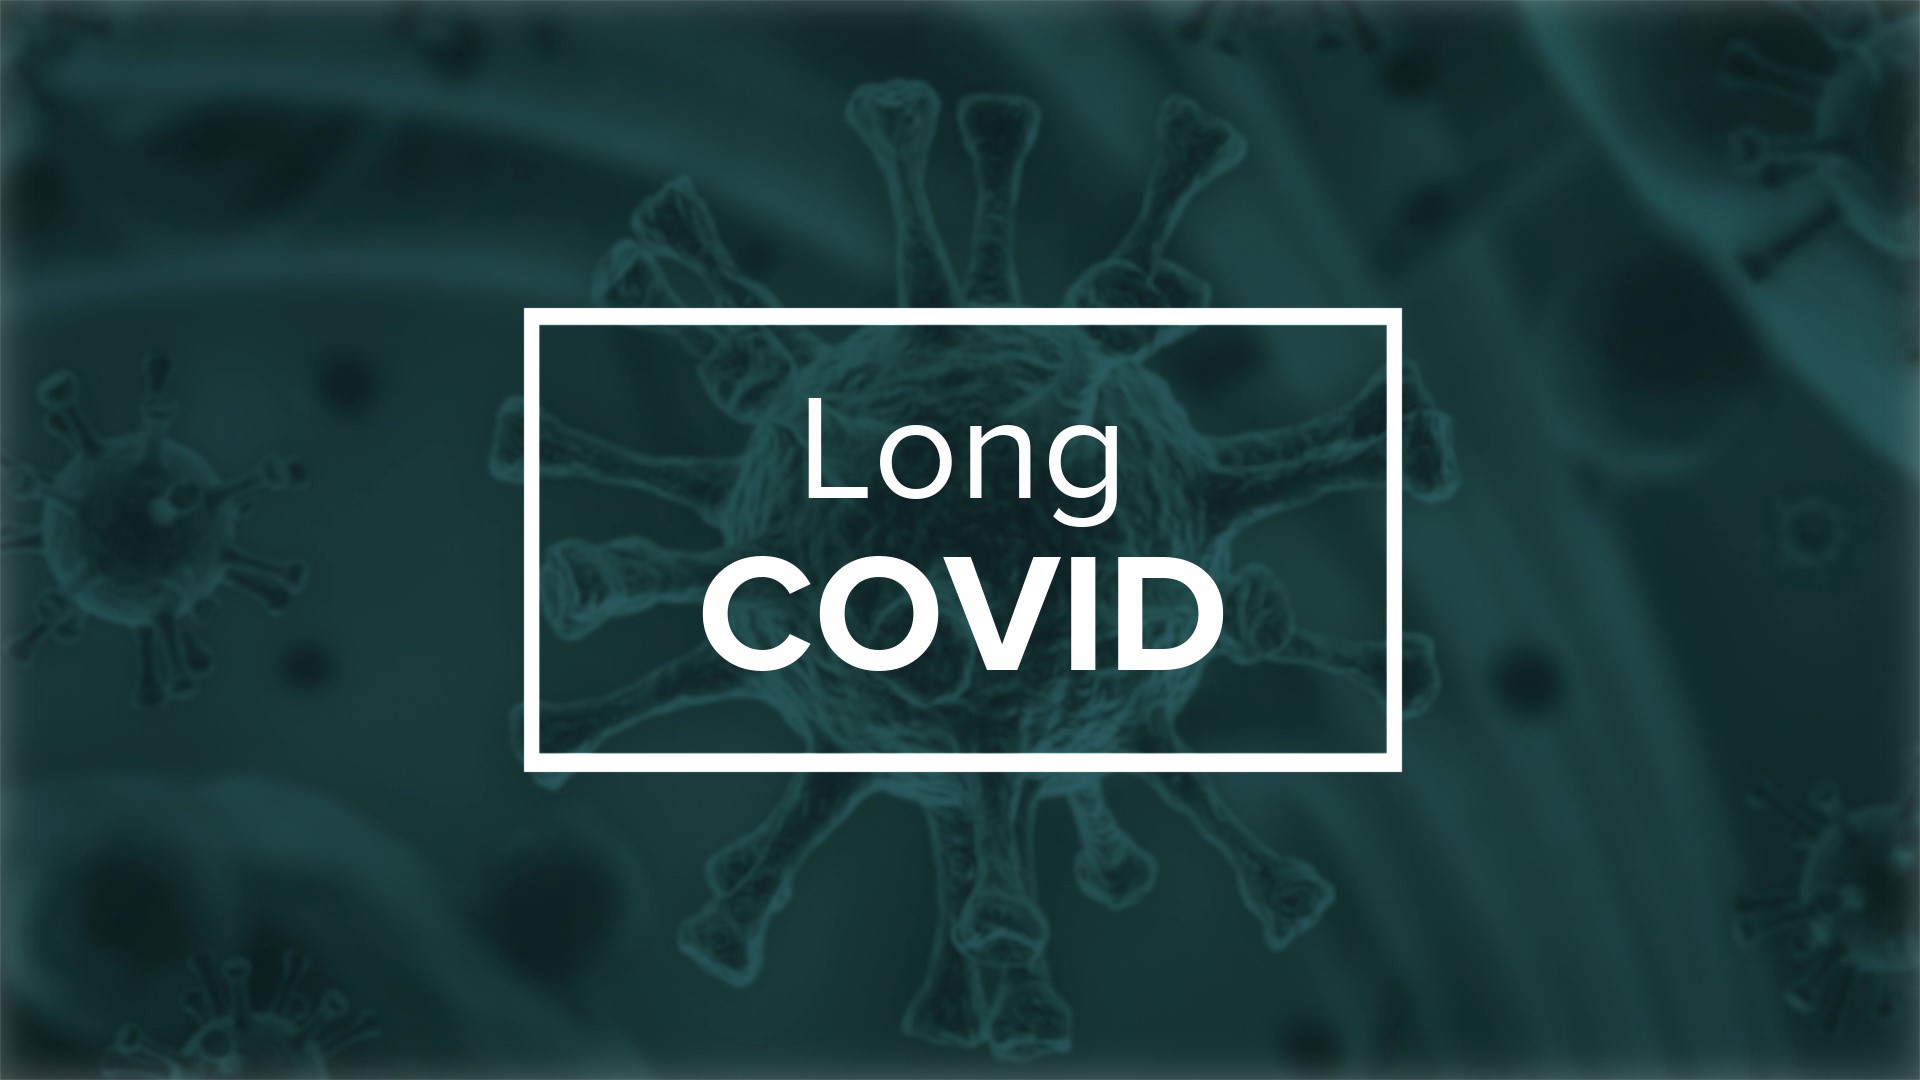 It's called "Long COVID," and here in northeastern and central Pennsylvania, doctors say some patients are struggling.